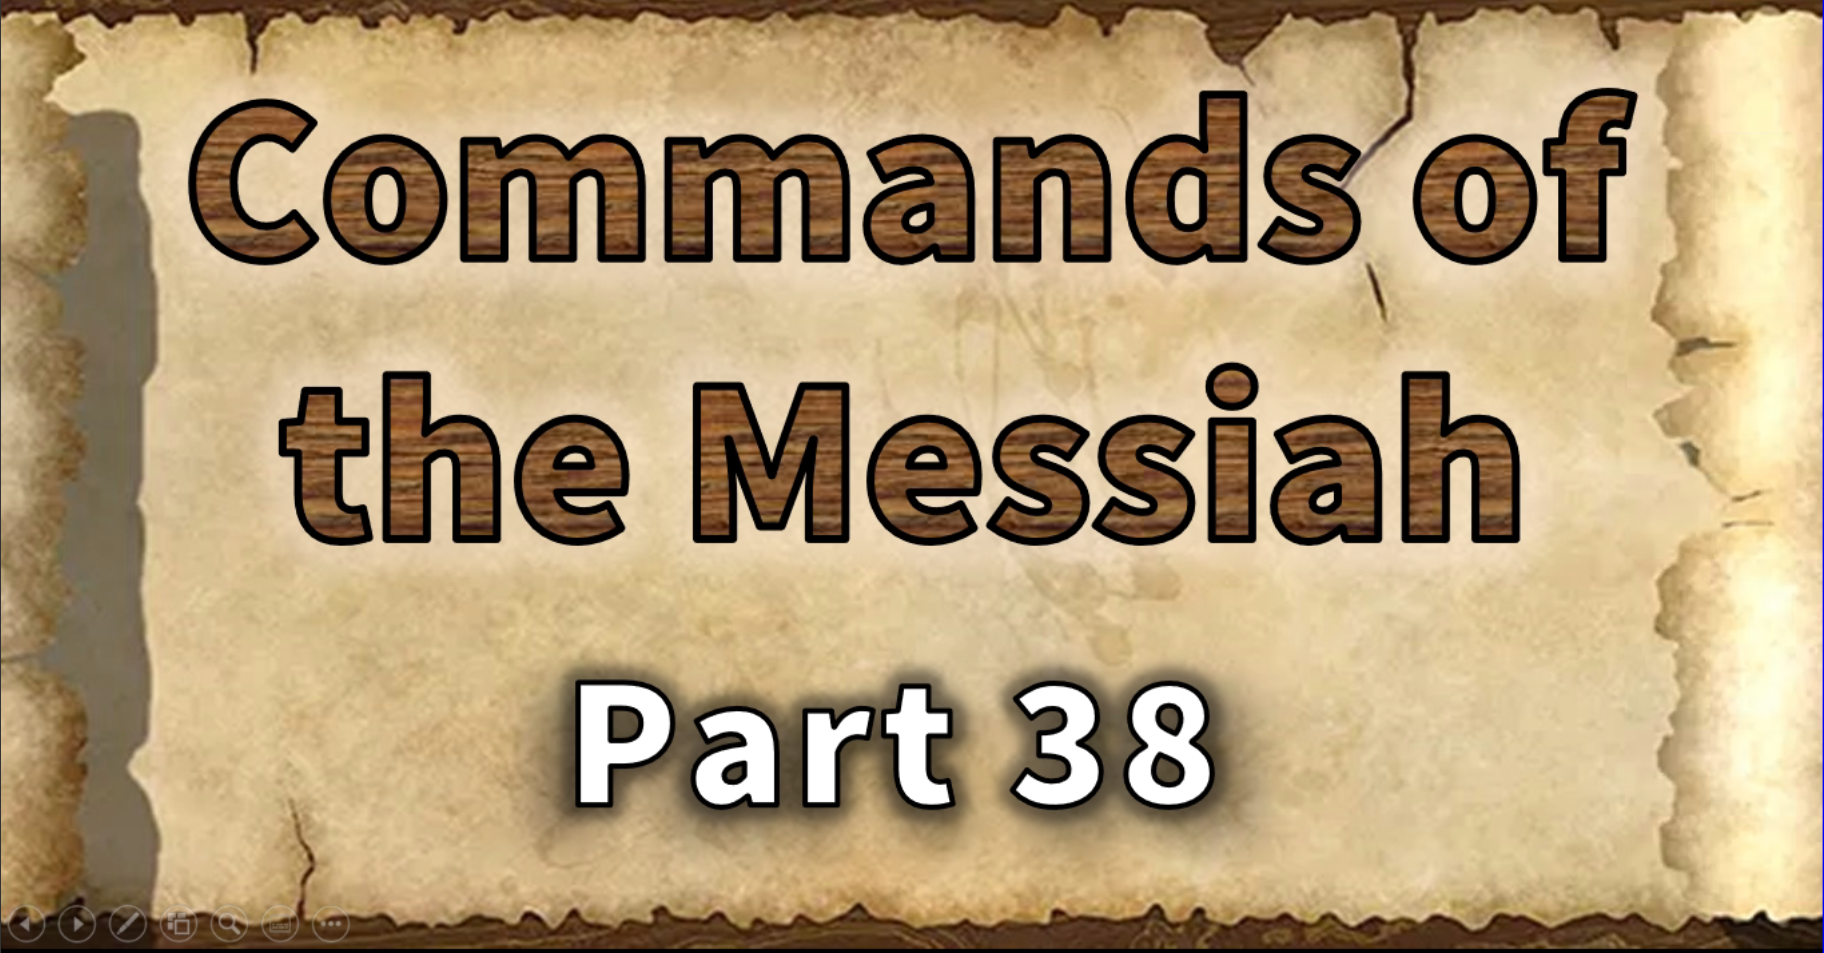 Commands of the messiah - Part 38